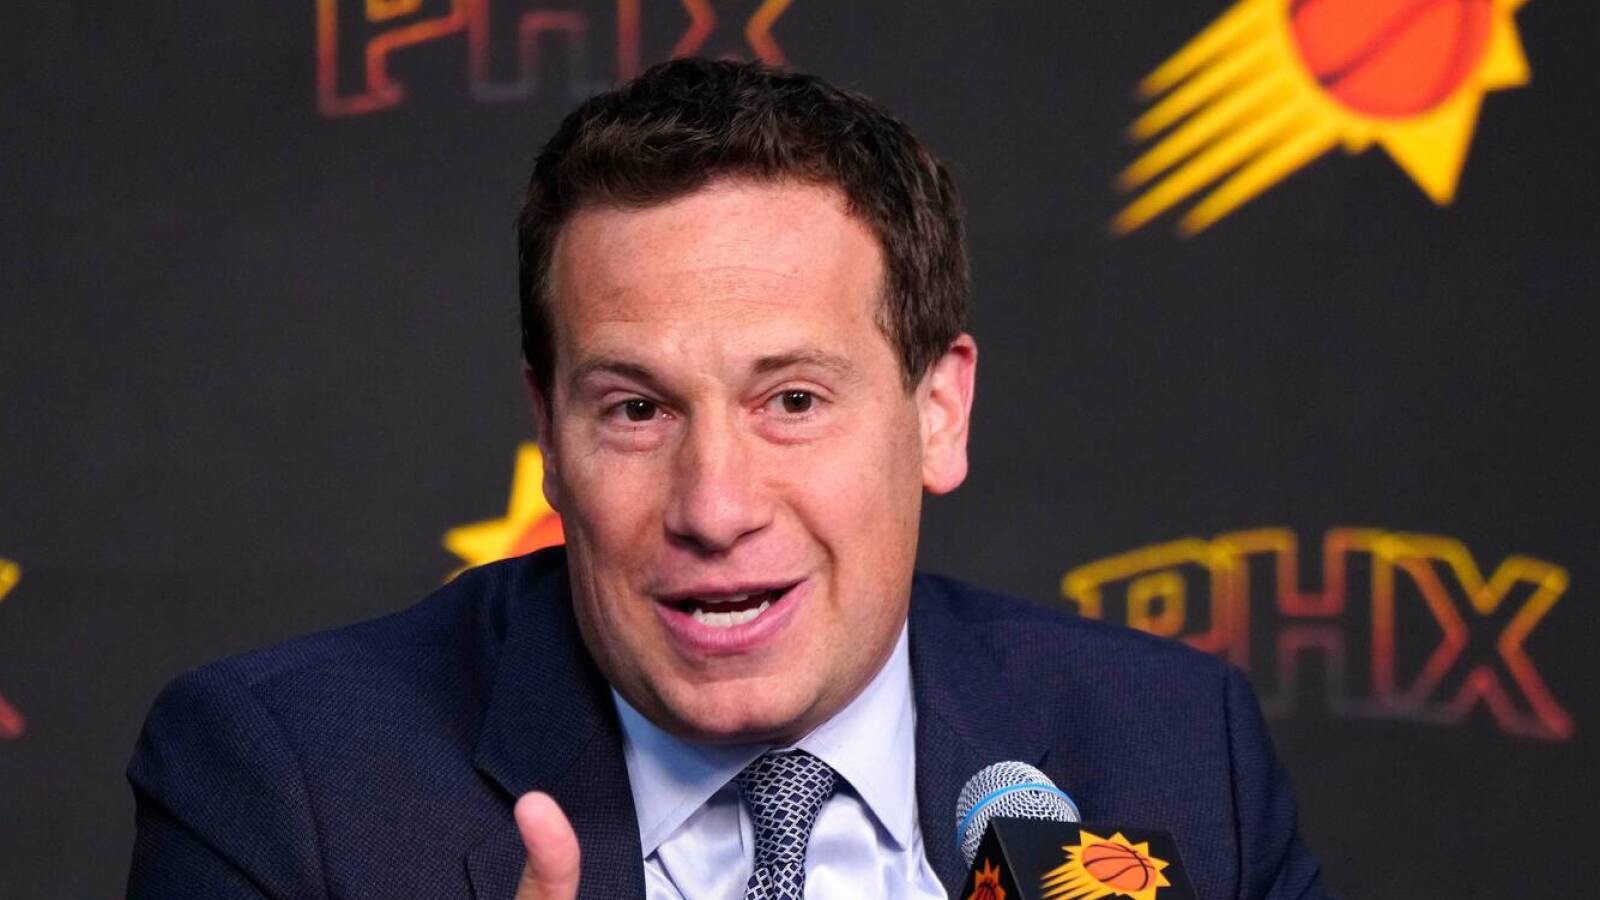 Suns owner after disastrous season: 'The house is not on fire'